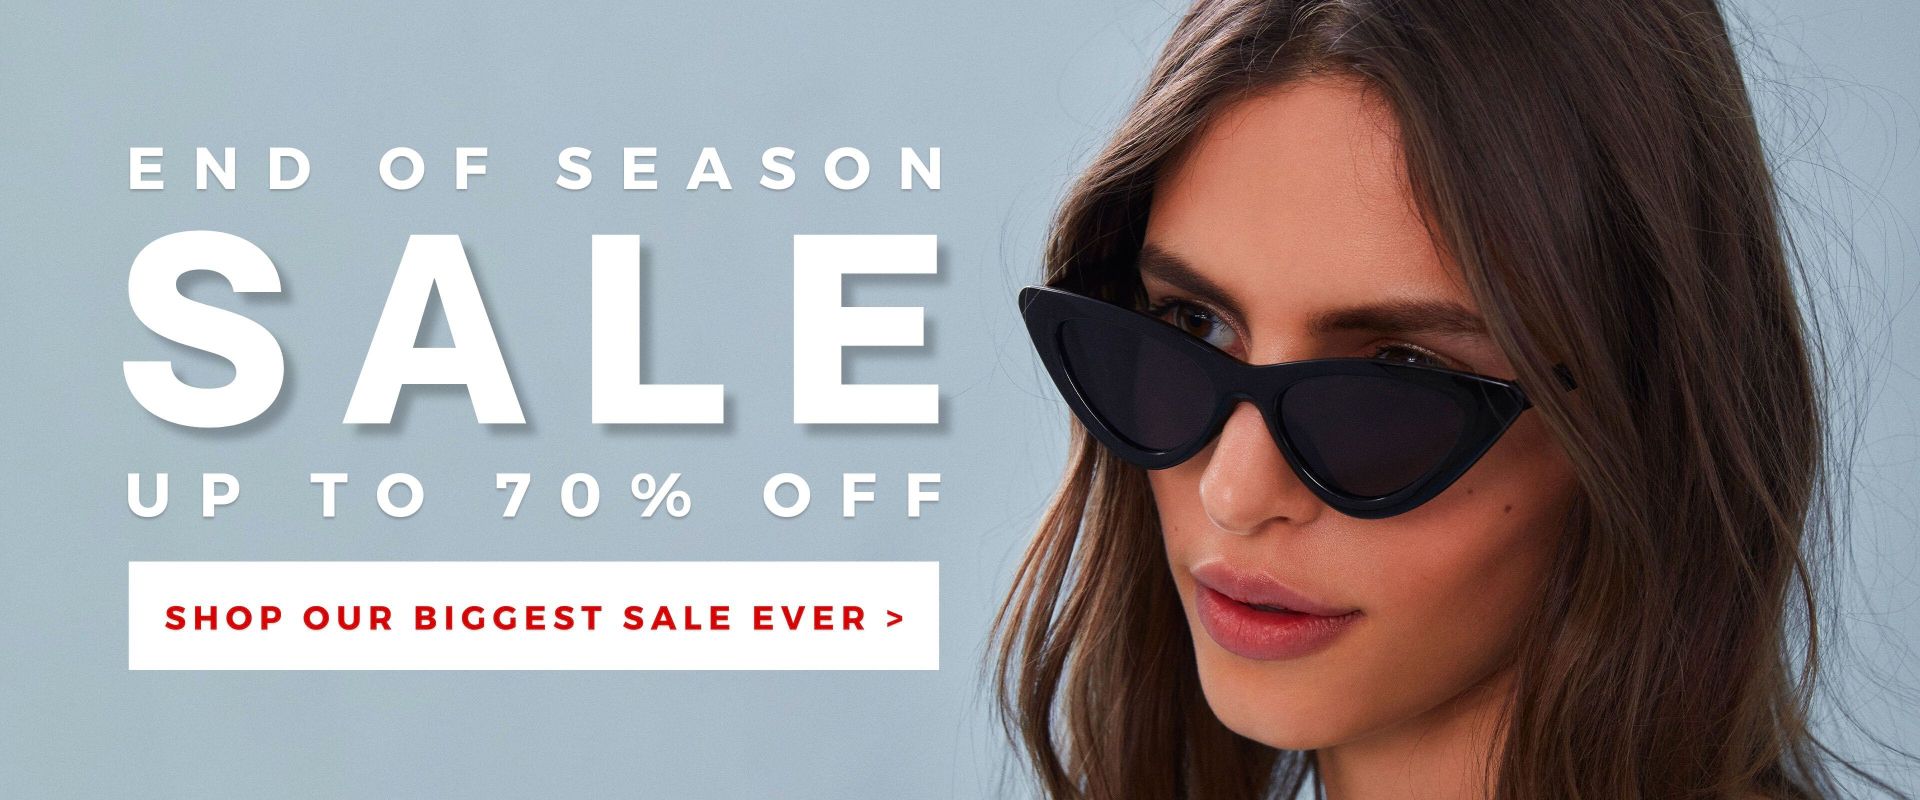 End of season sale, up to 70% off